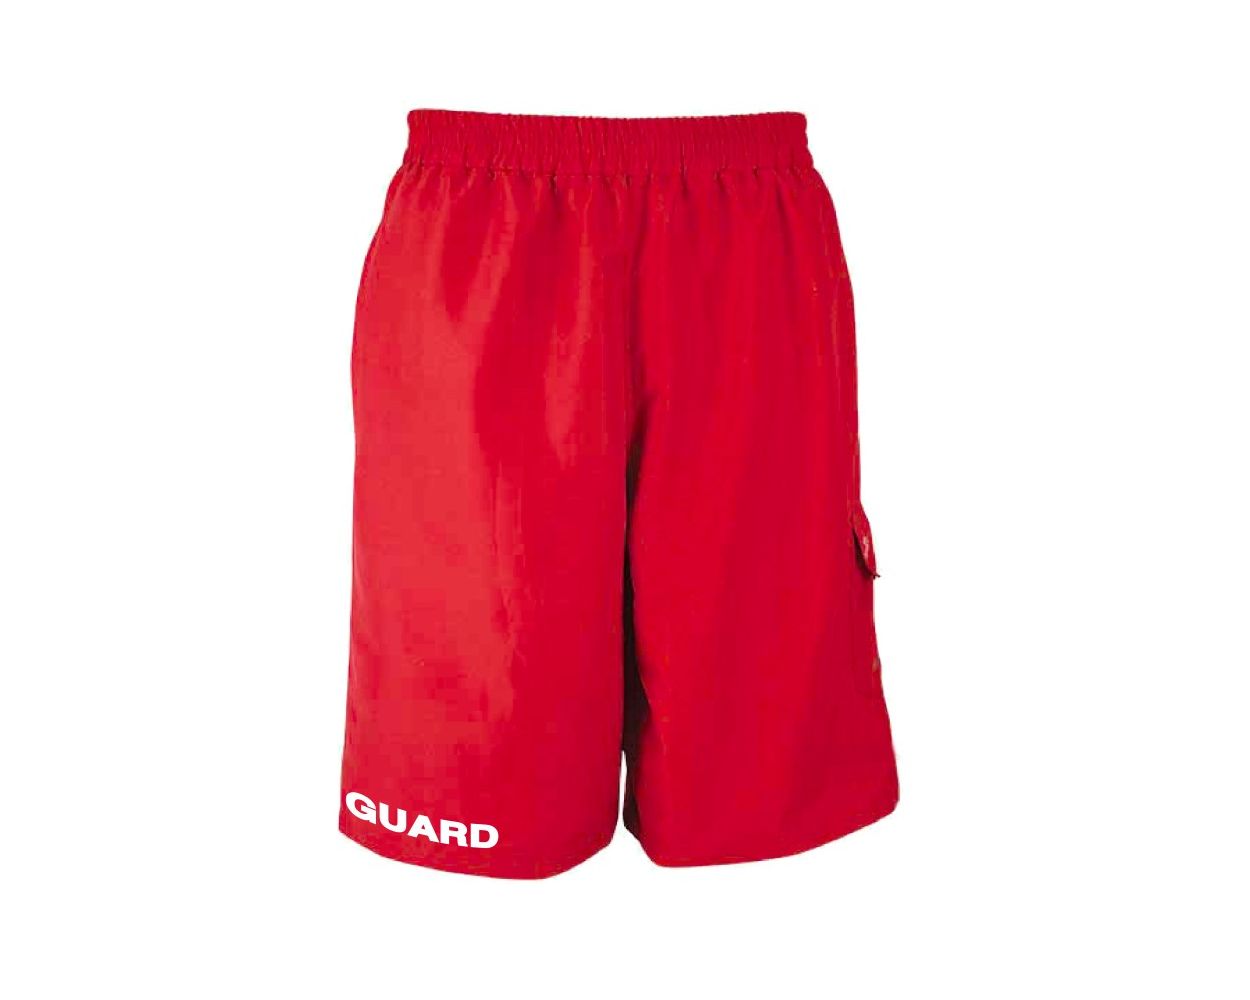 Hook and Tackle Mens Driftwood Stretch Hybrid Shorts Red 42W